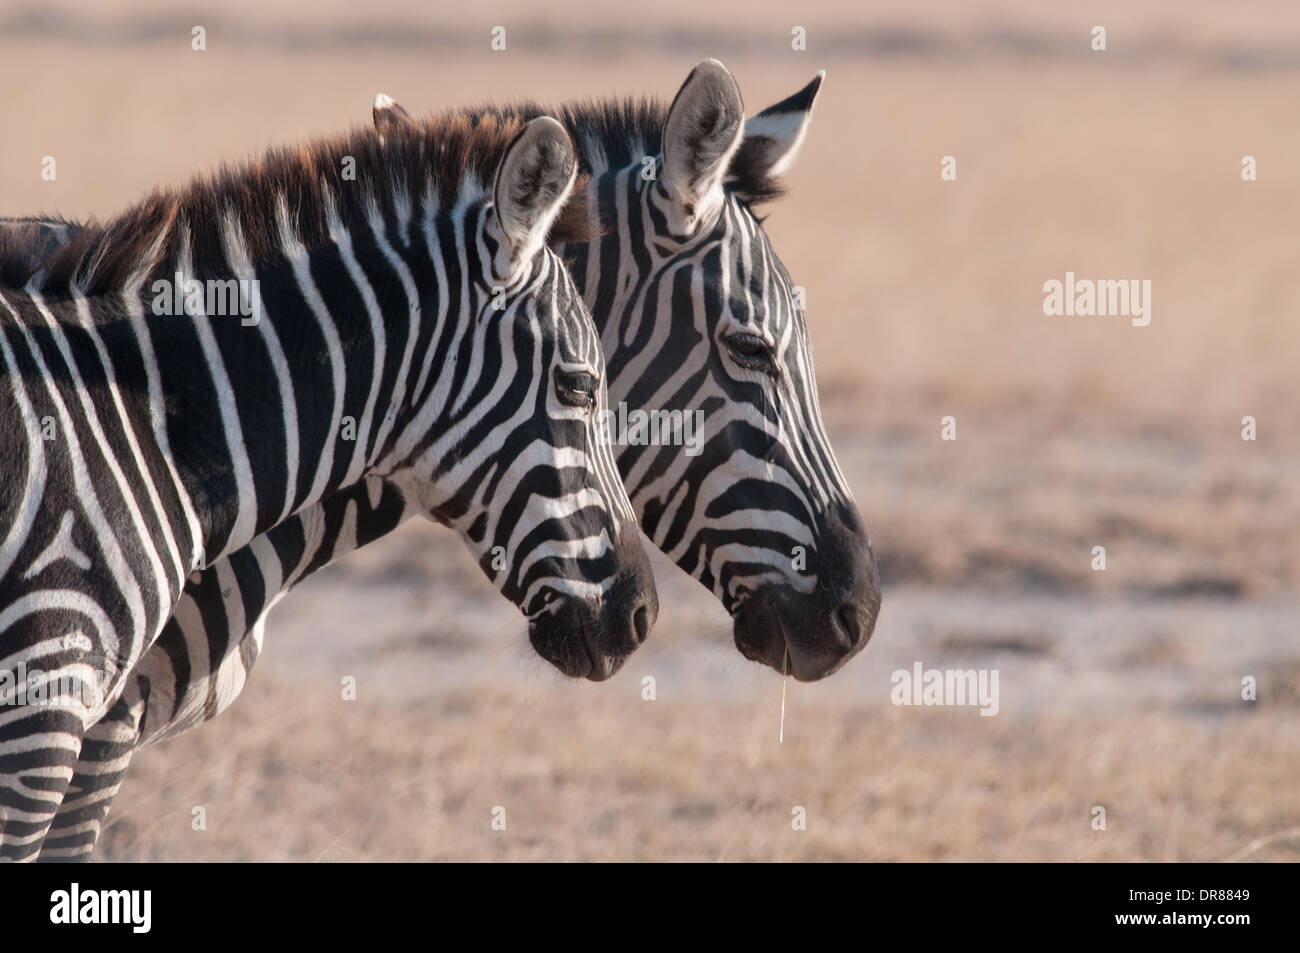 Close up portrait of two Common Zebras in Amboseli National Park Kenya East Africa Stock Photo